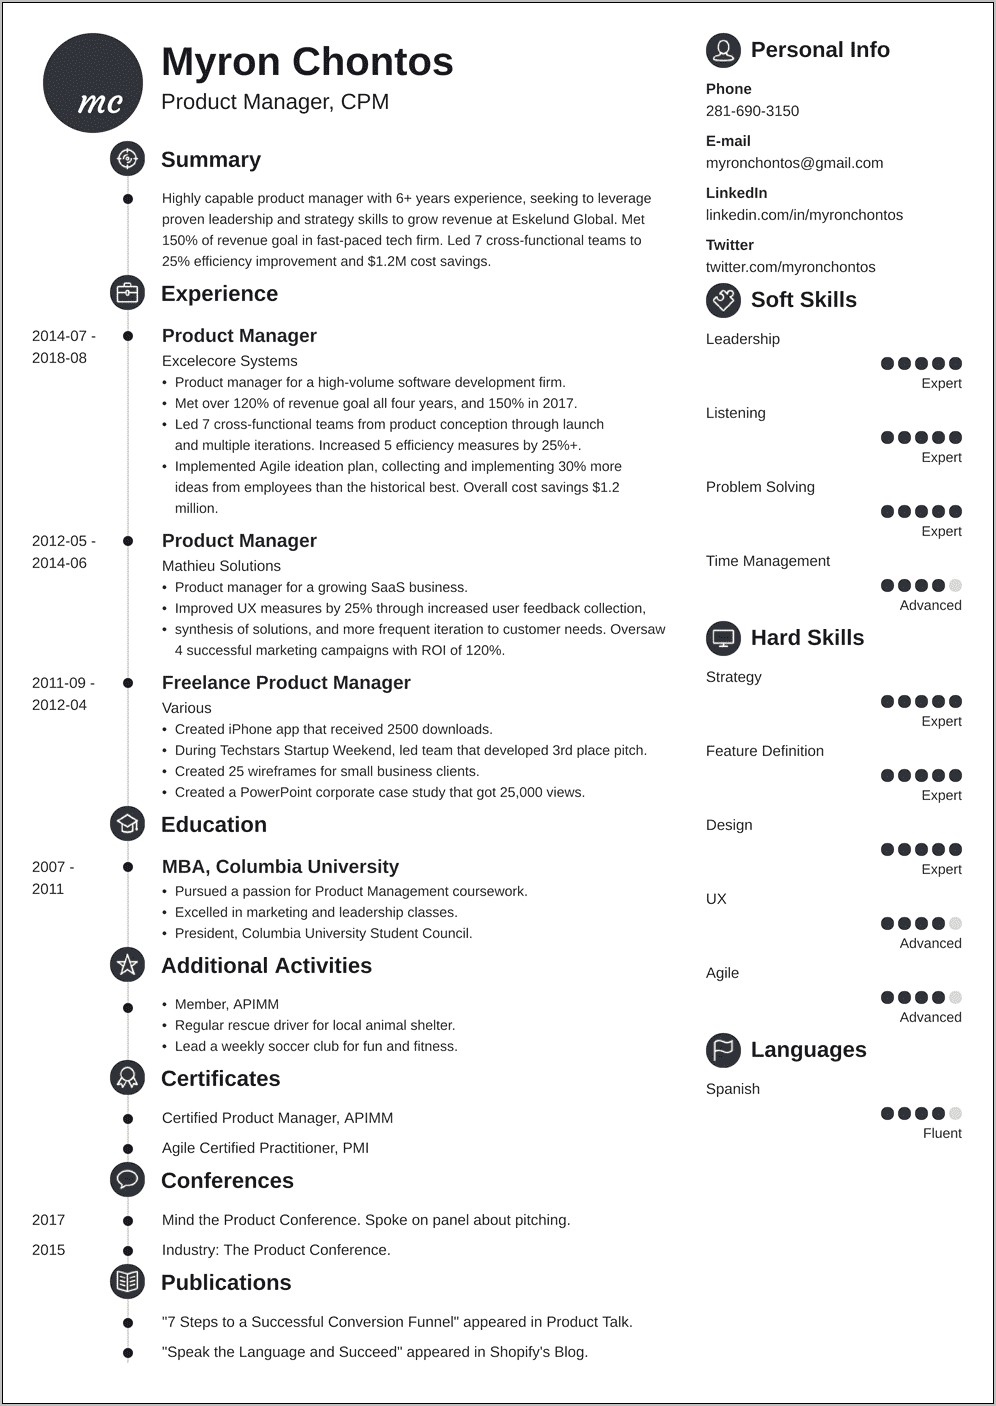 Product Manager Skills Section Resume